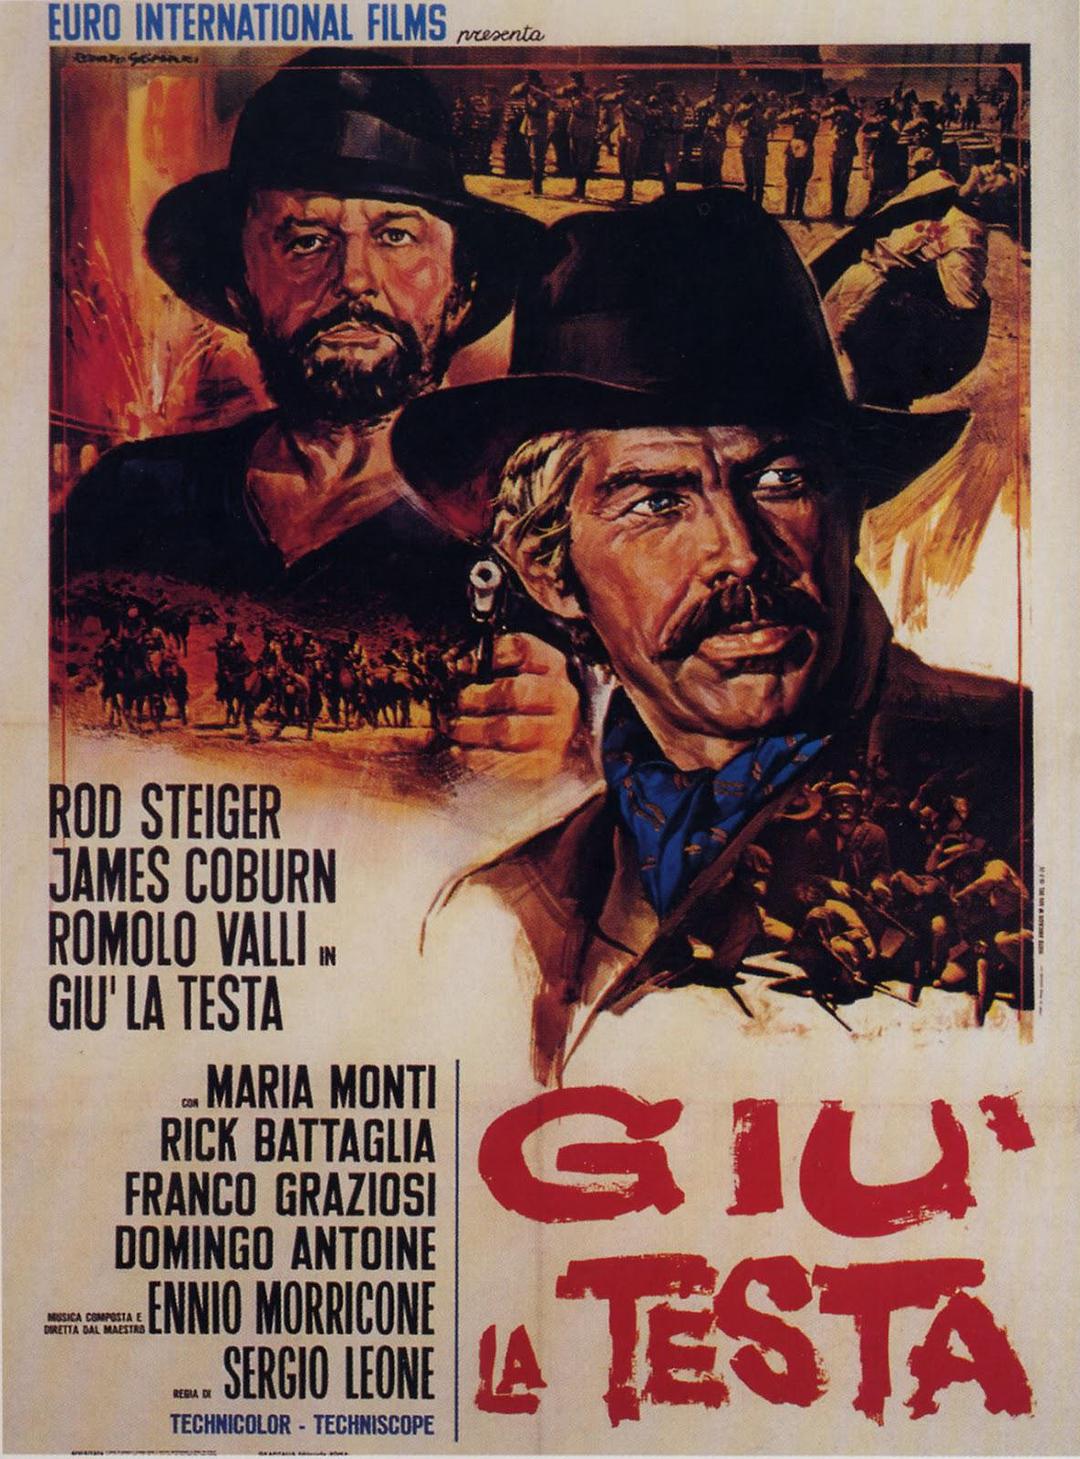  A.Fistful.of.Dynamite.1971.INTERNAL.US.CUT.1080p.BluRay.X264-AMIABLE 21.98G-1.png